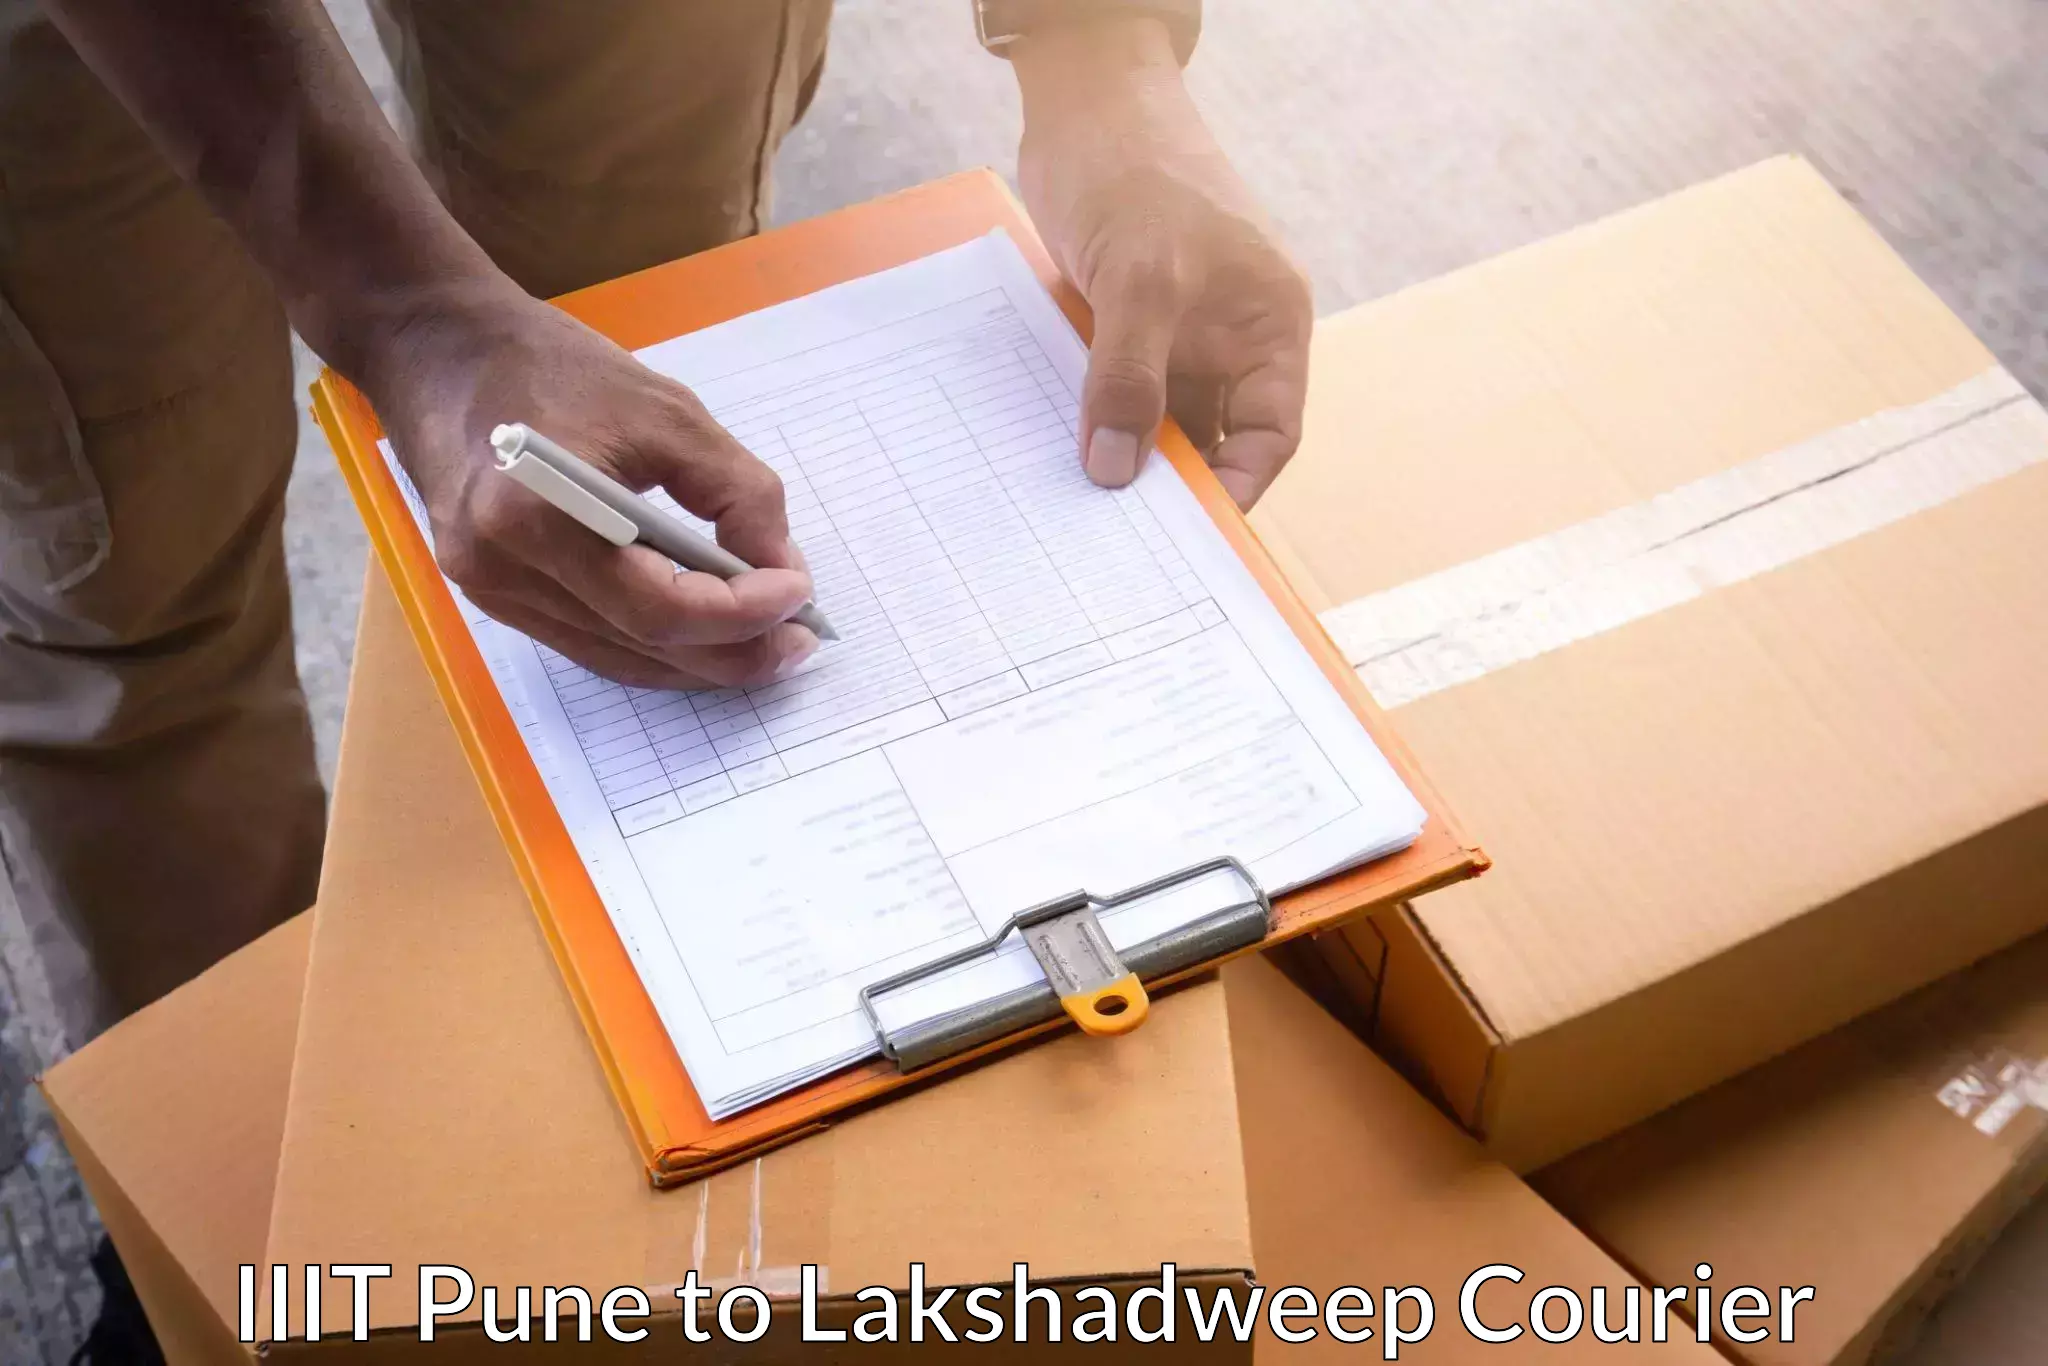 Advanced courier platforms in IIIT Pune to Lakshadweep